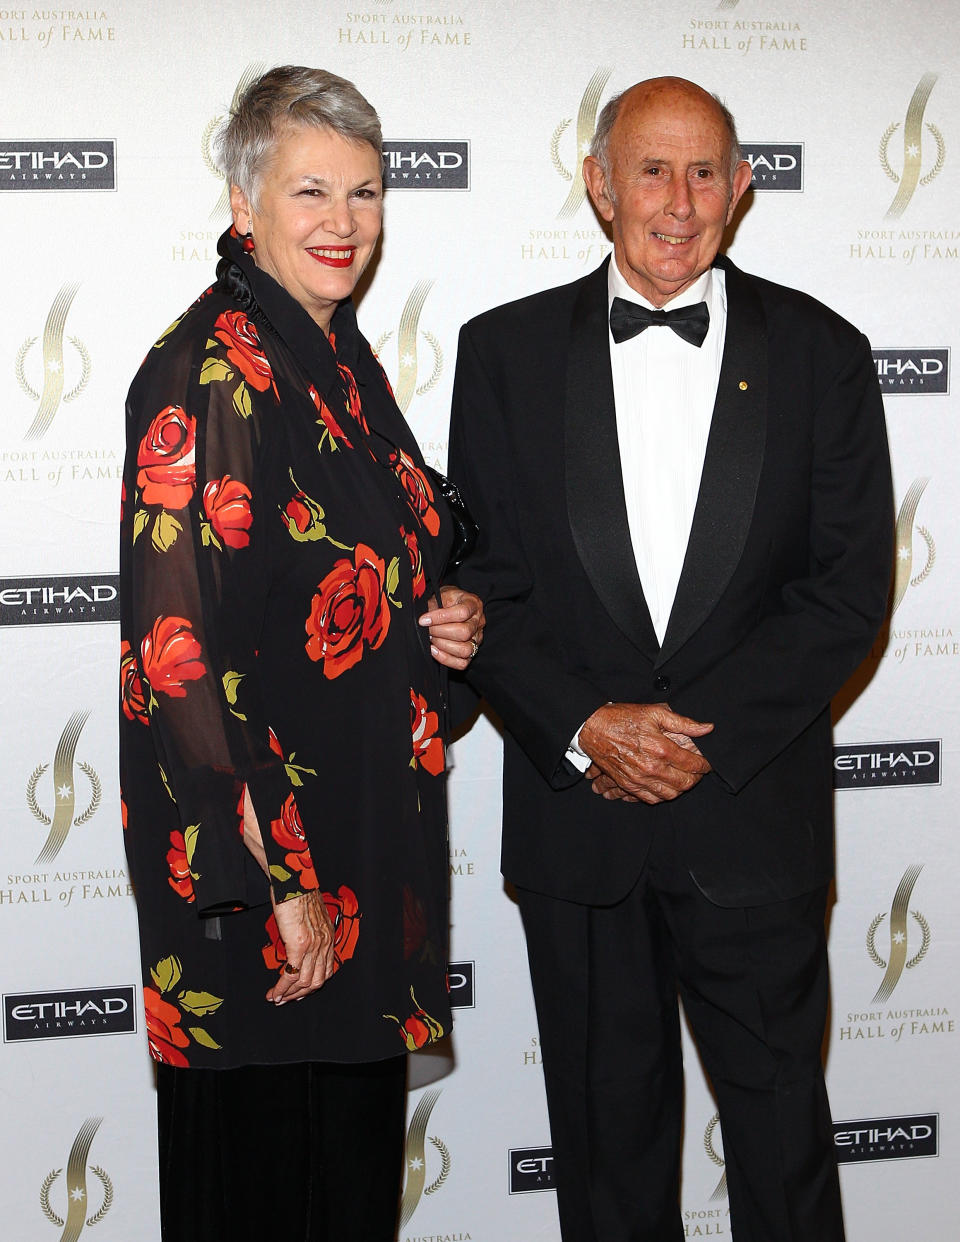 John and Lynne Landy, pictured here at the Sport Australia Hall of Fame awards in 2010.